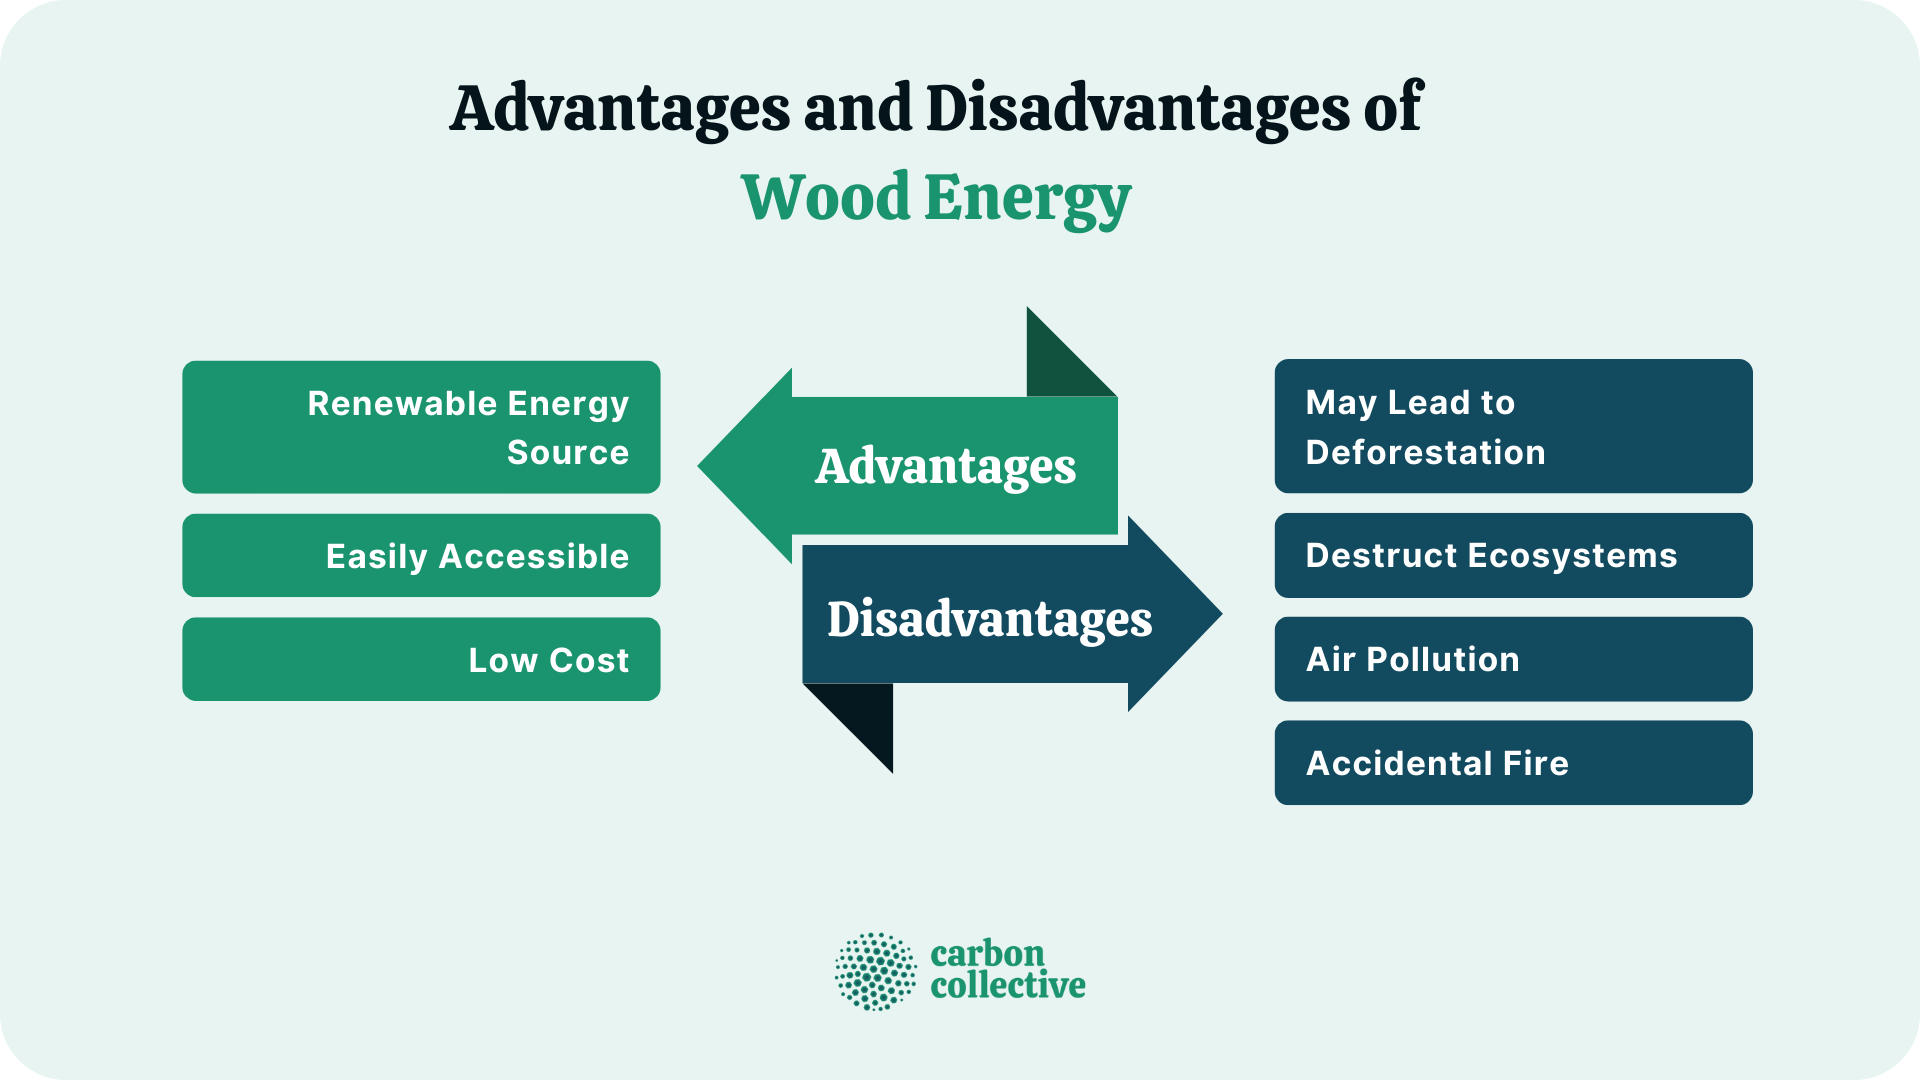 What are two disadvantages of wood?